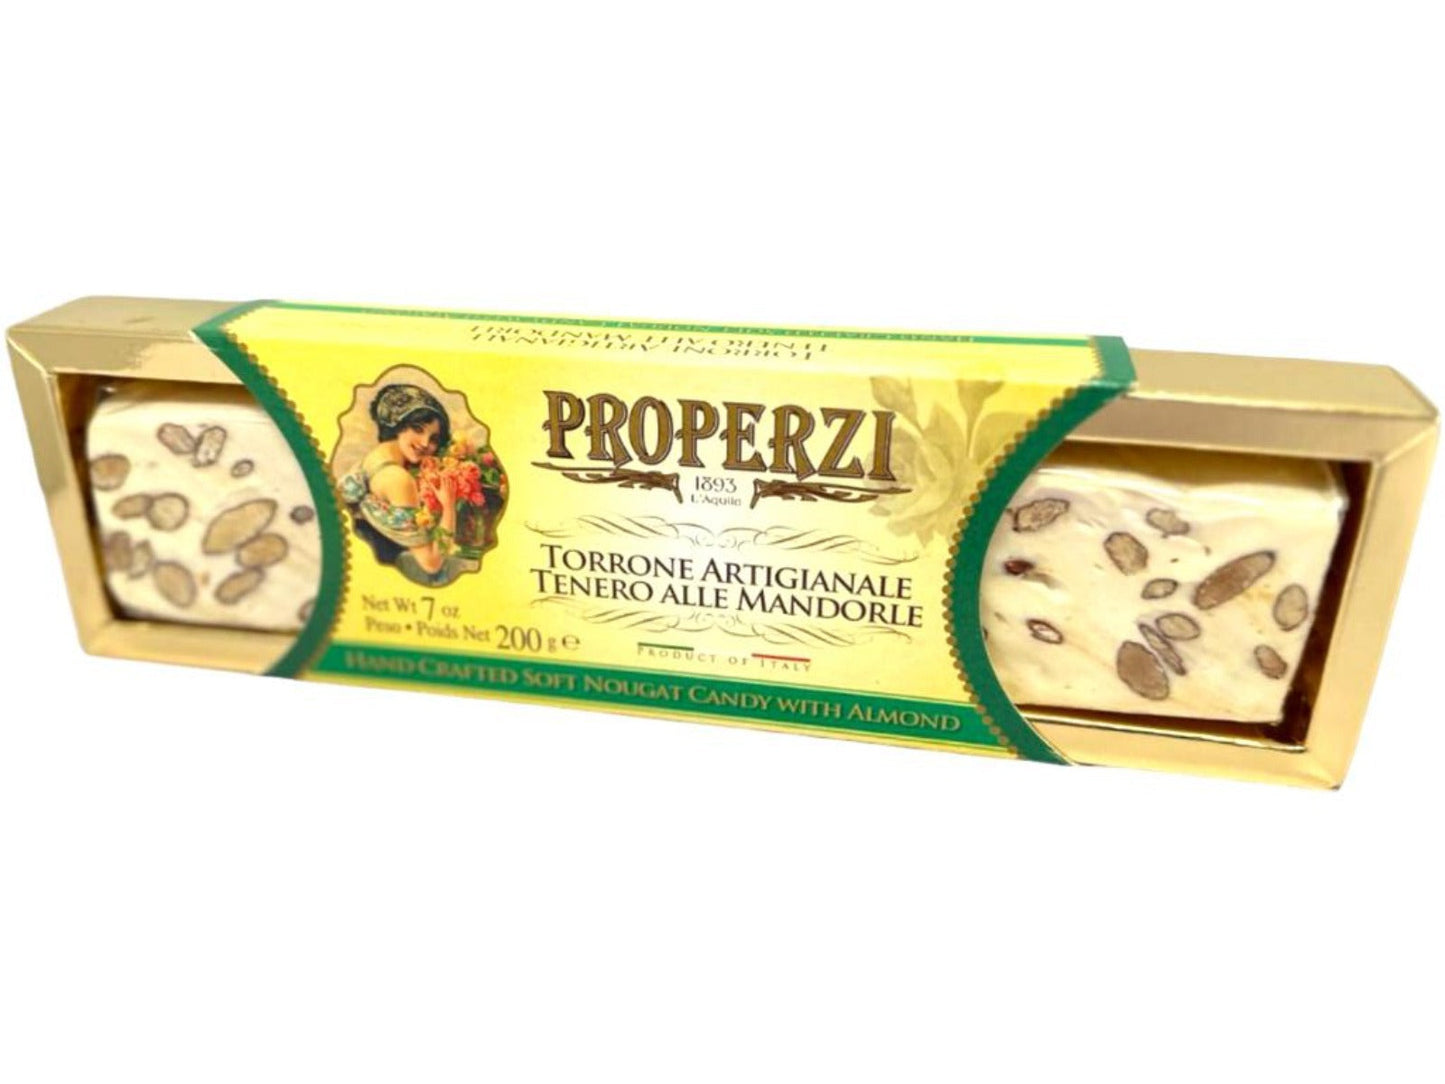 Properzi Italian Hand Crafted Soft Nougat Candy with Almond 200g - 2 Pack Total 400g Best Before End of Feb 2025